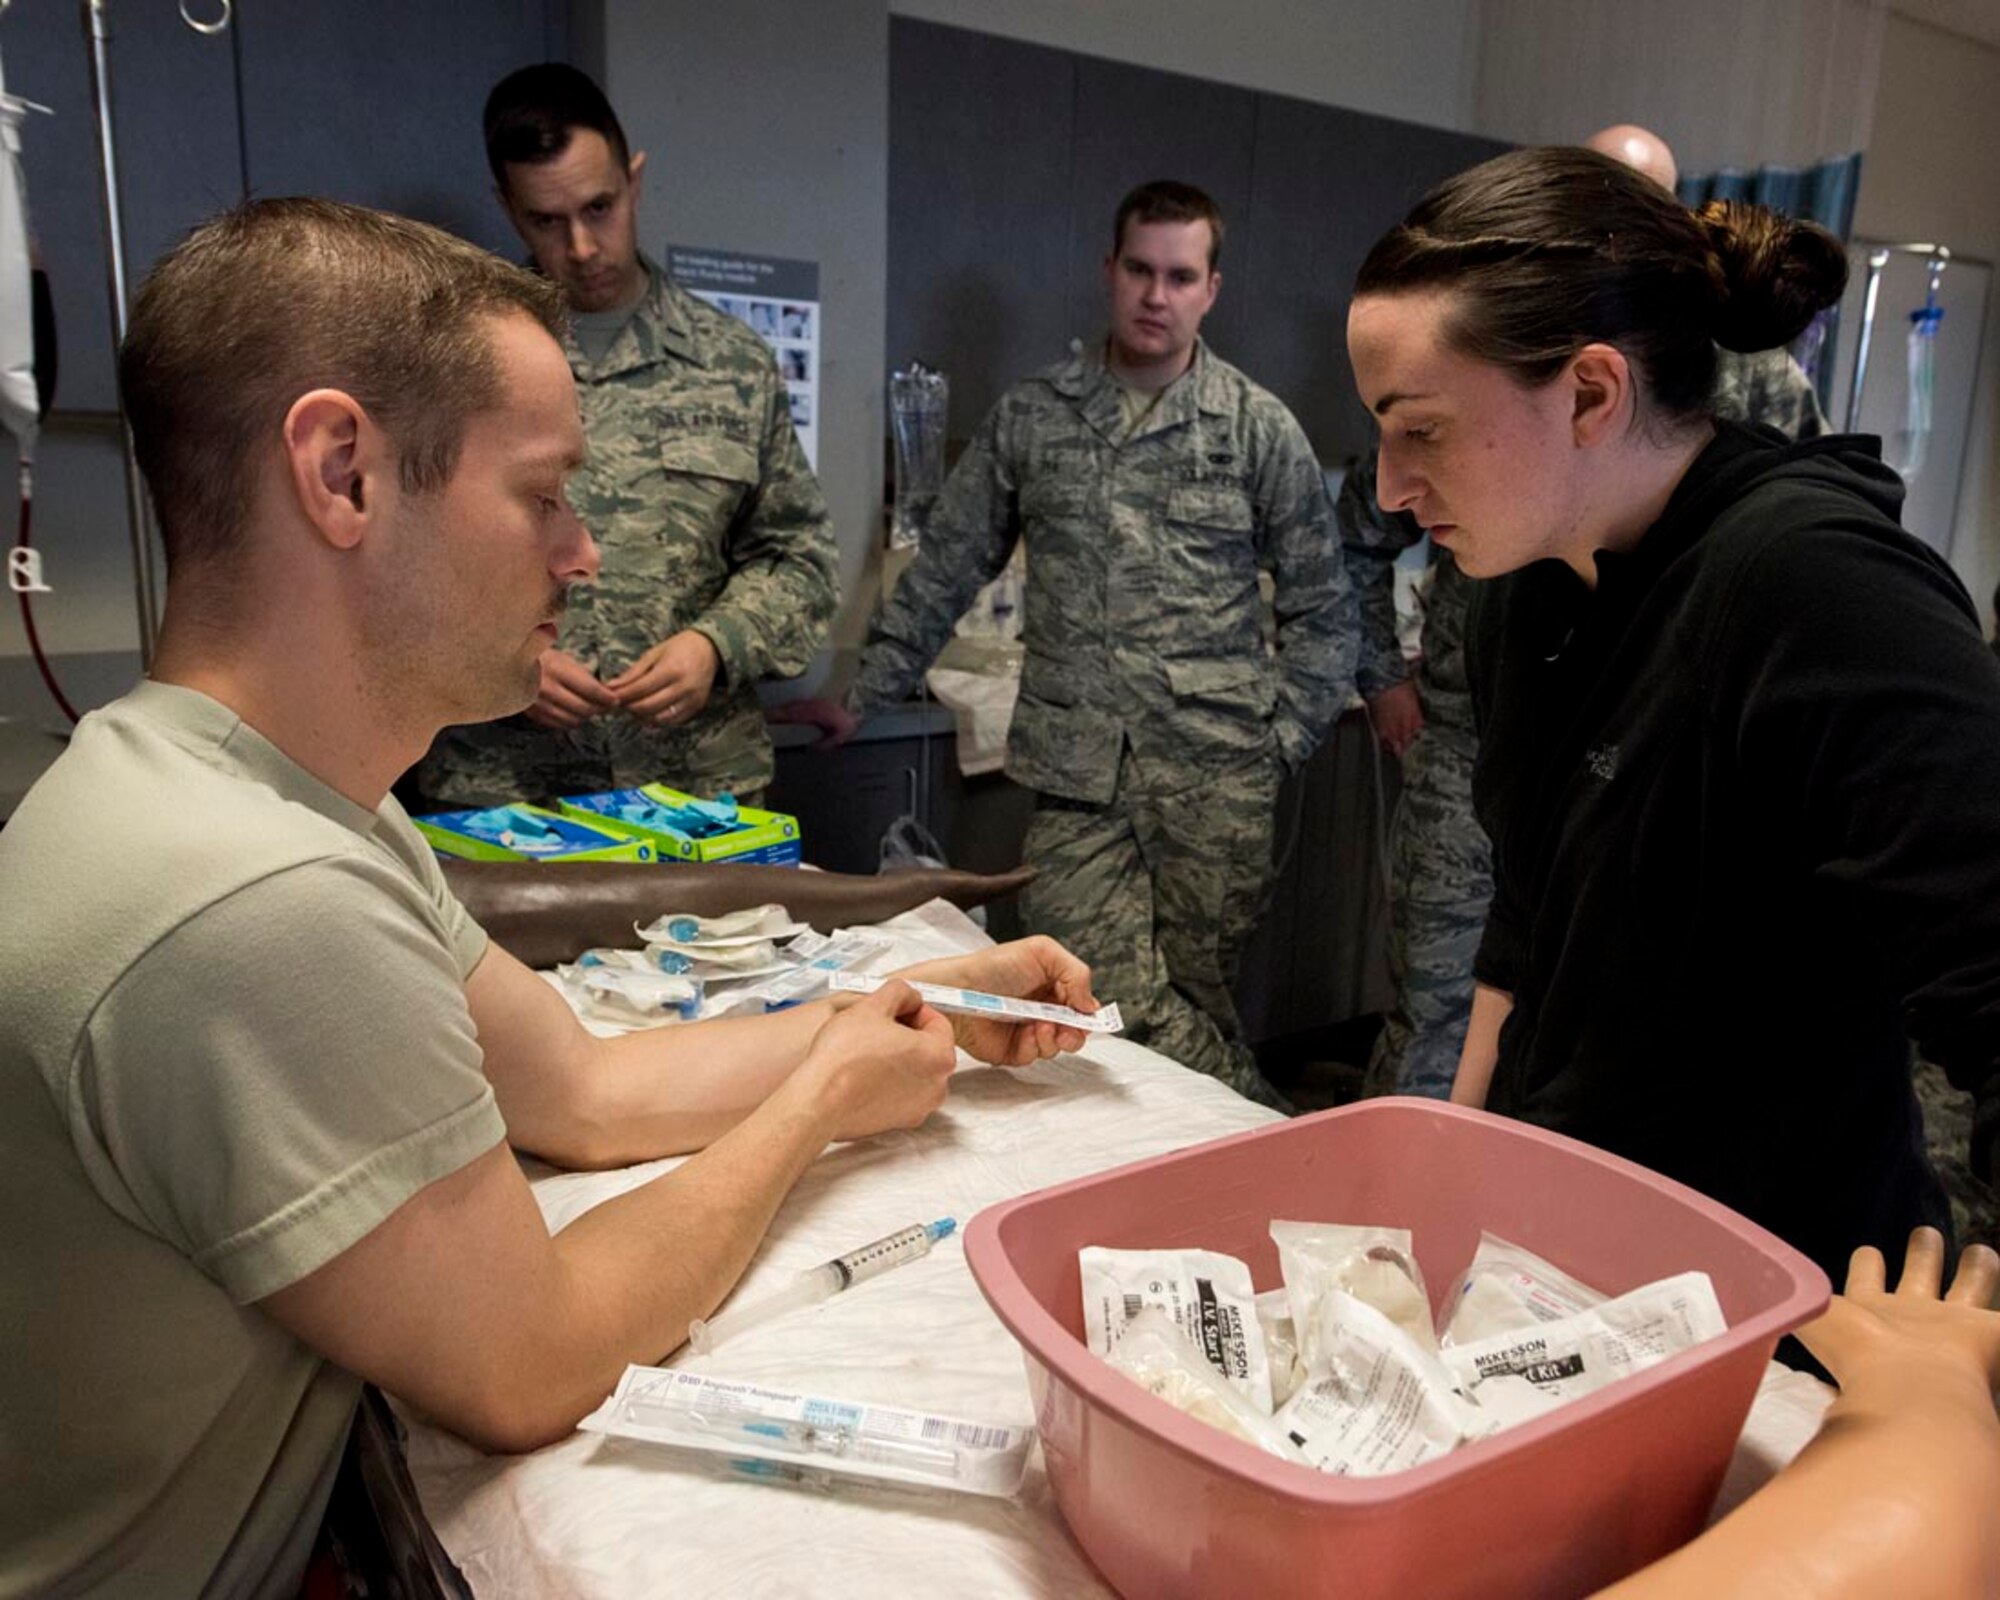 Capt. Neal Alexander, maternal child flight manager at the 92nd Medical Group, shows Airman 1st Class Jessica Schiller, an aerospace medical service apprentice at the 141st Medical Group, where to check for expiration dates on medical supplies during IV and laboratory draw training March 4, 2018 at the simulation lab at the Washington State University College of Nursing Riverpoint Campus in Spokane, Wash. More than 45 nurses, medics and medical providers from the 141st MDG as well as seven medical personnel assigned to the 92nd MDG teamed up for the combined training during March’s unit training assembly. (U.S. Air National Guard photo by Staff Sgt. Rose M. Lust)